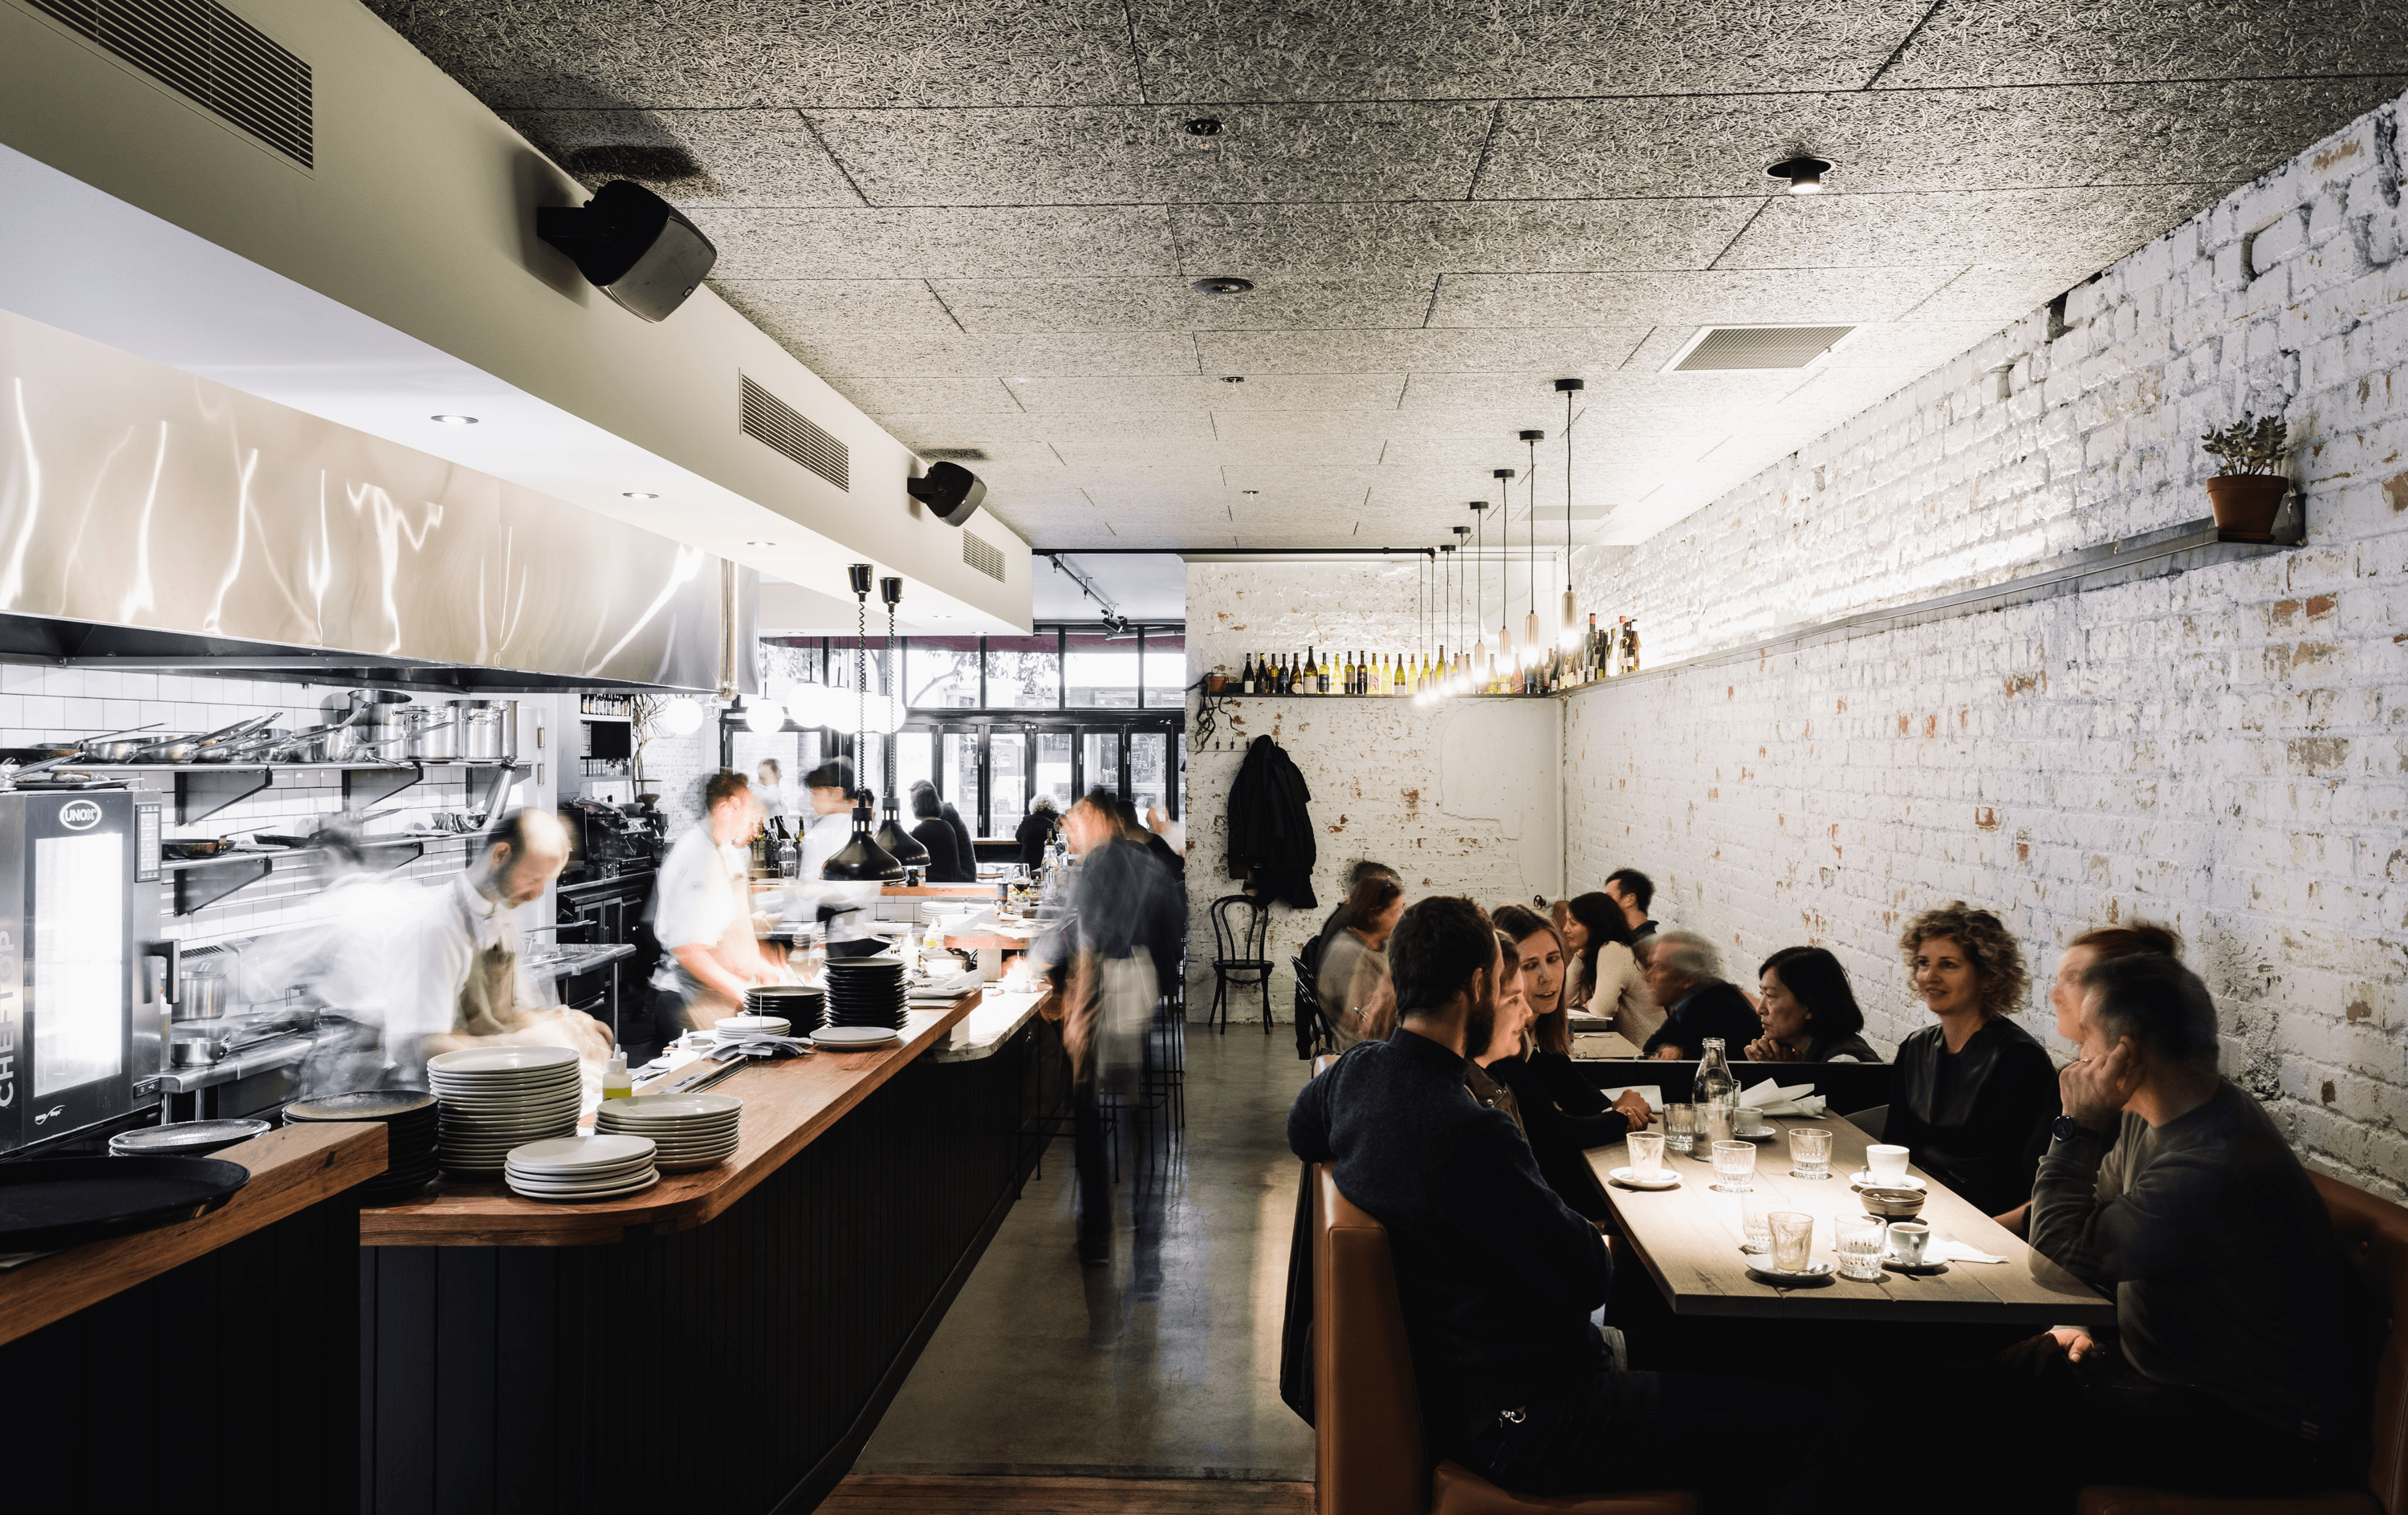 A long, thin restaurant bar where people are dining. Situated in Melbourne.